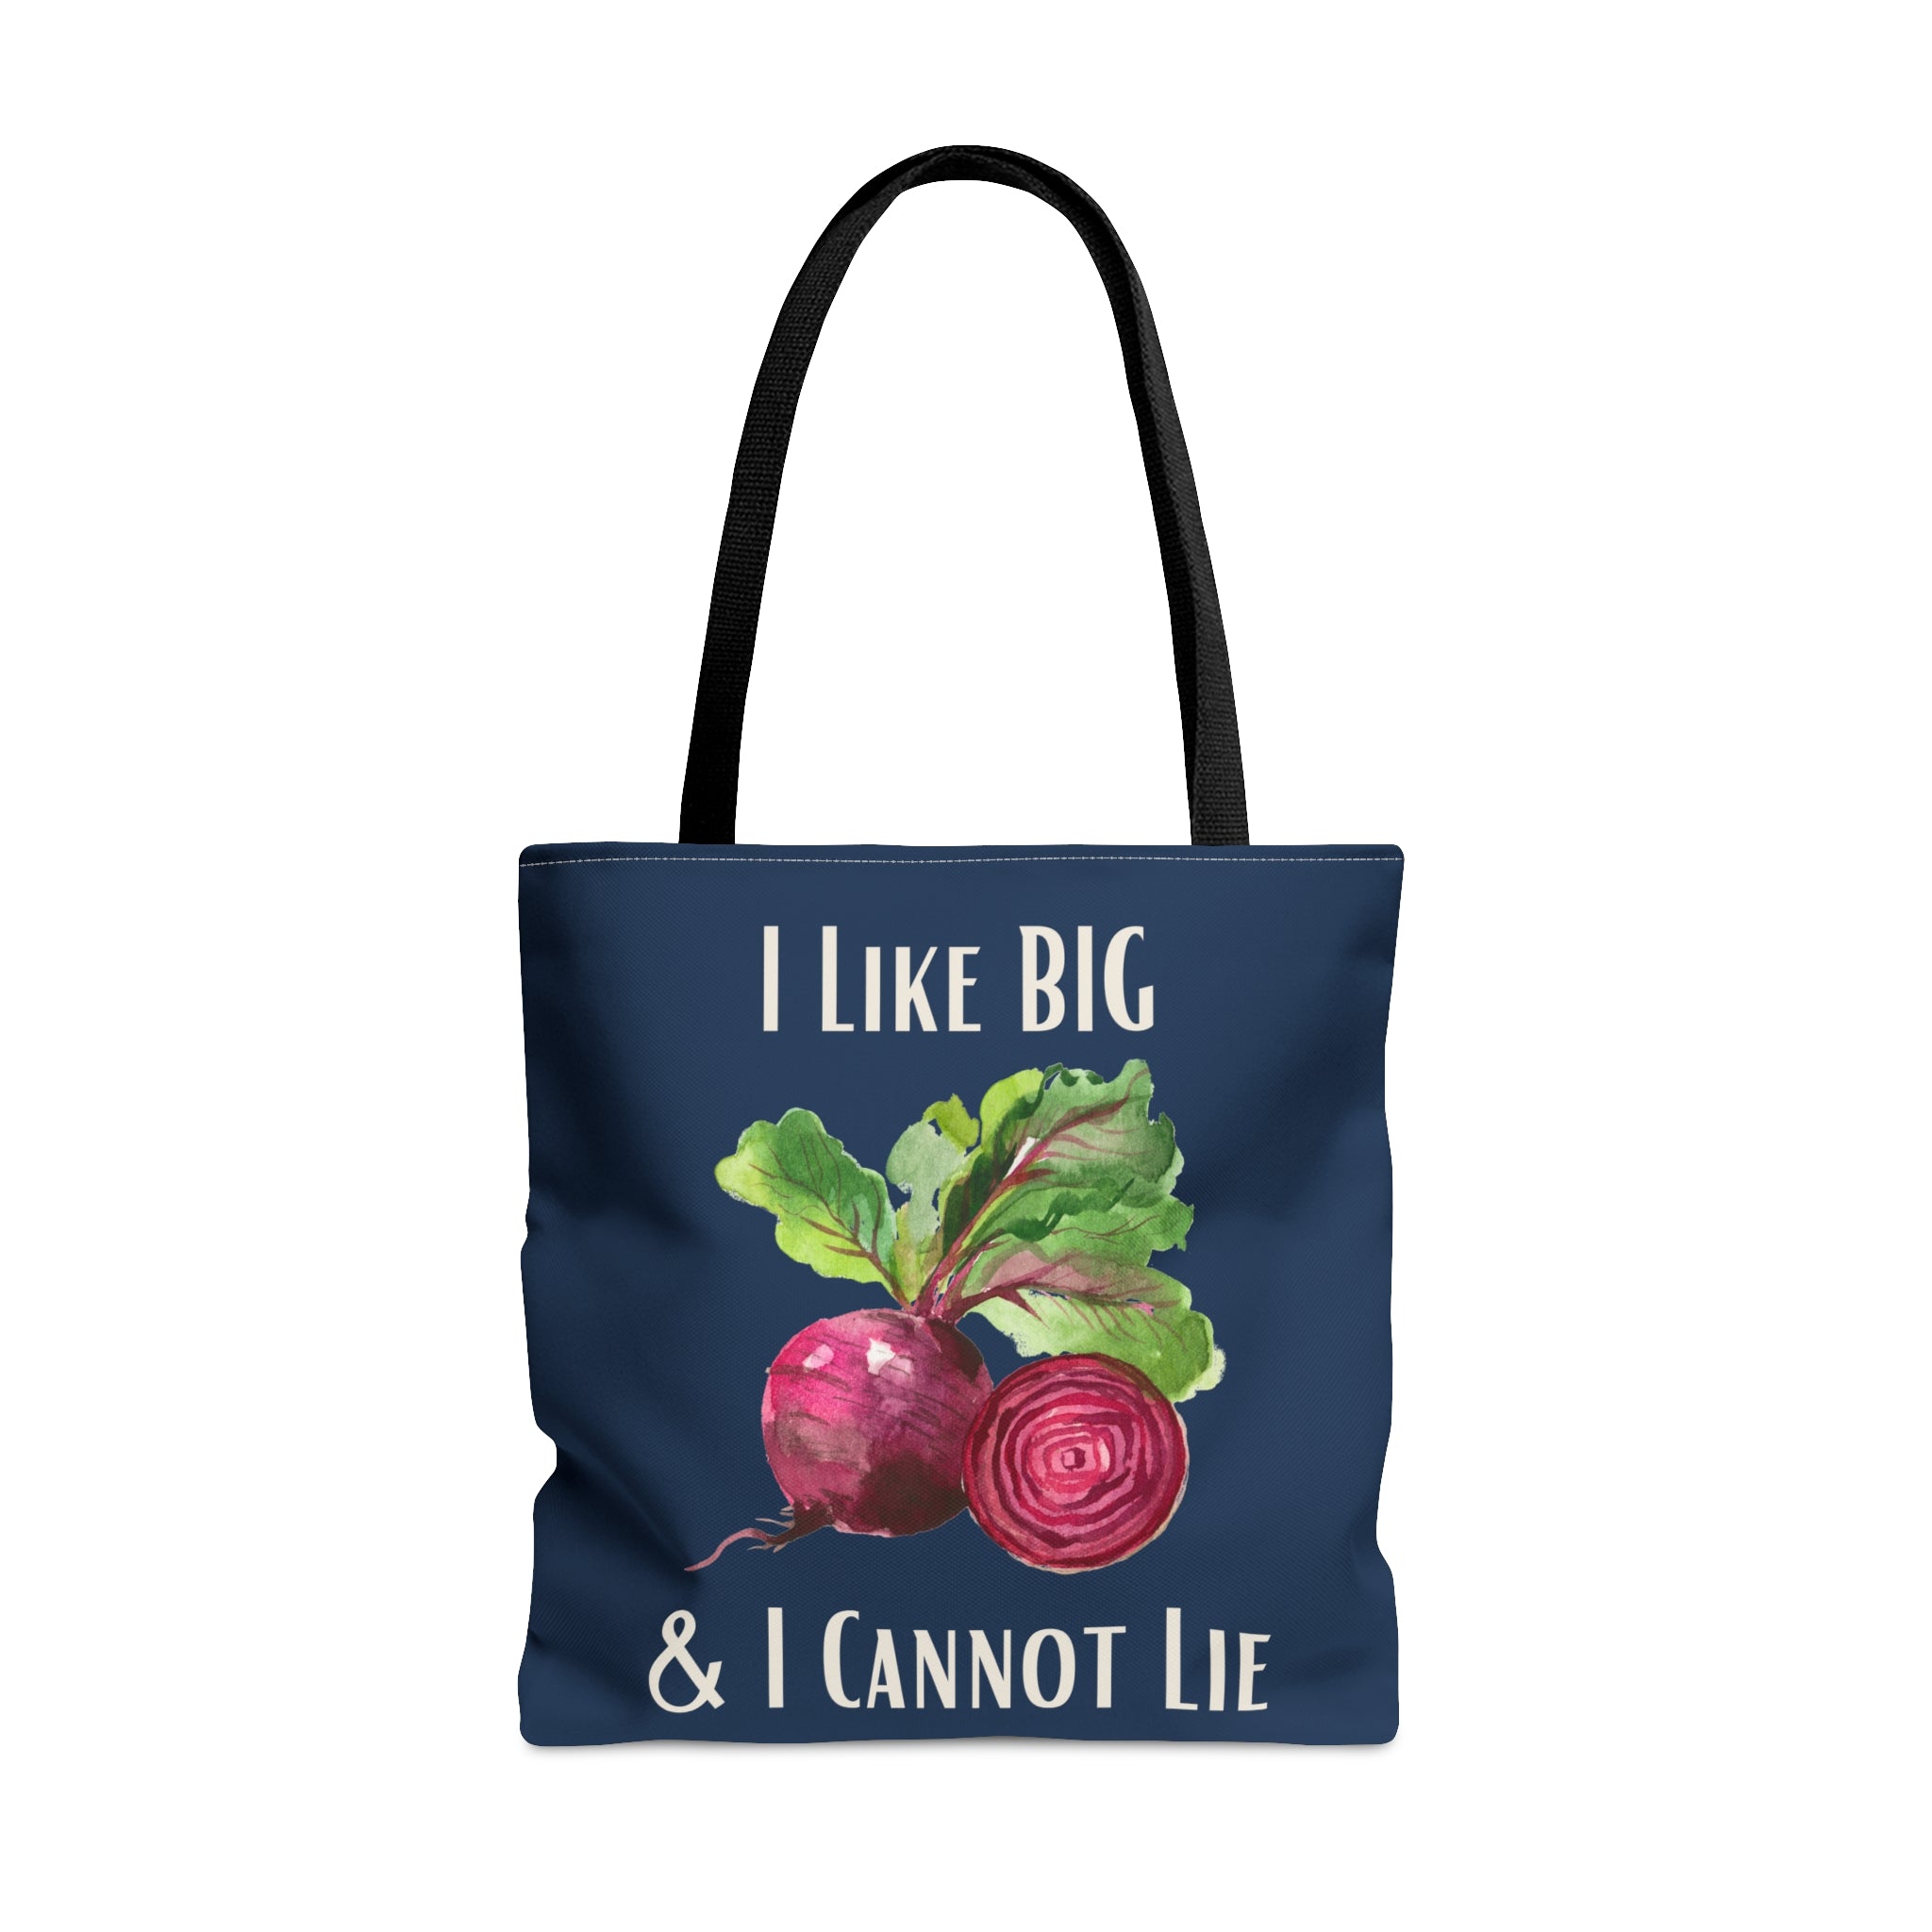 Navy tote with beets and words "I Like Big & I Cannot Lie"